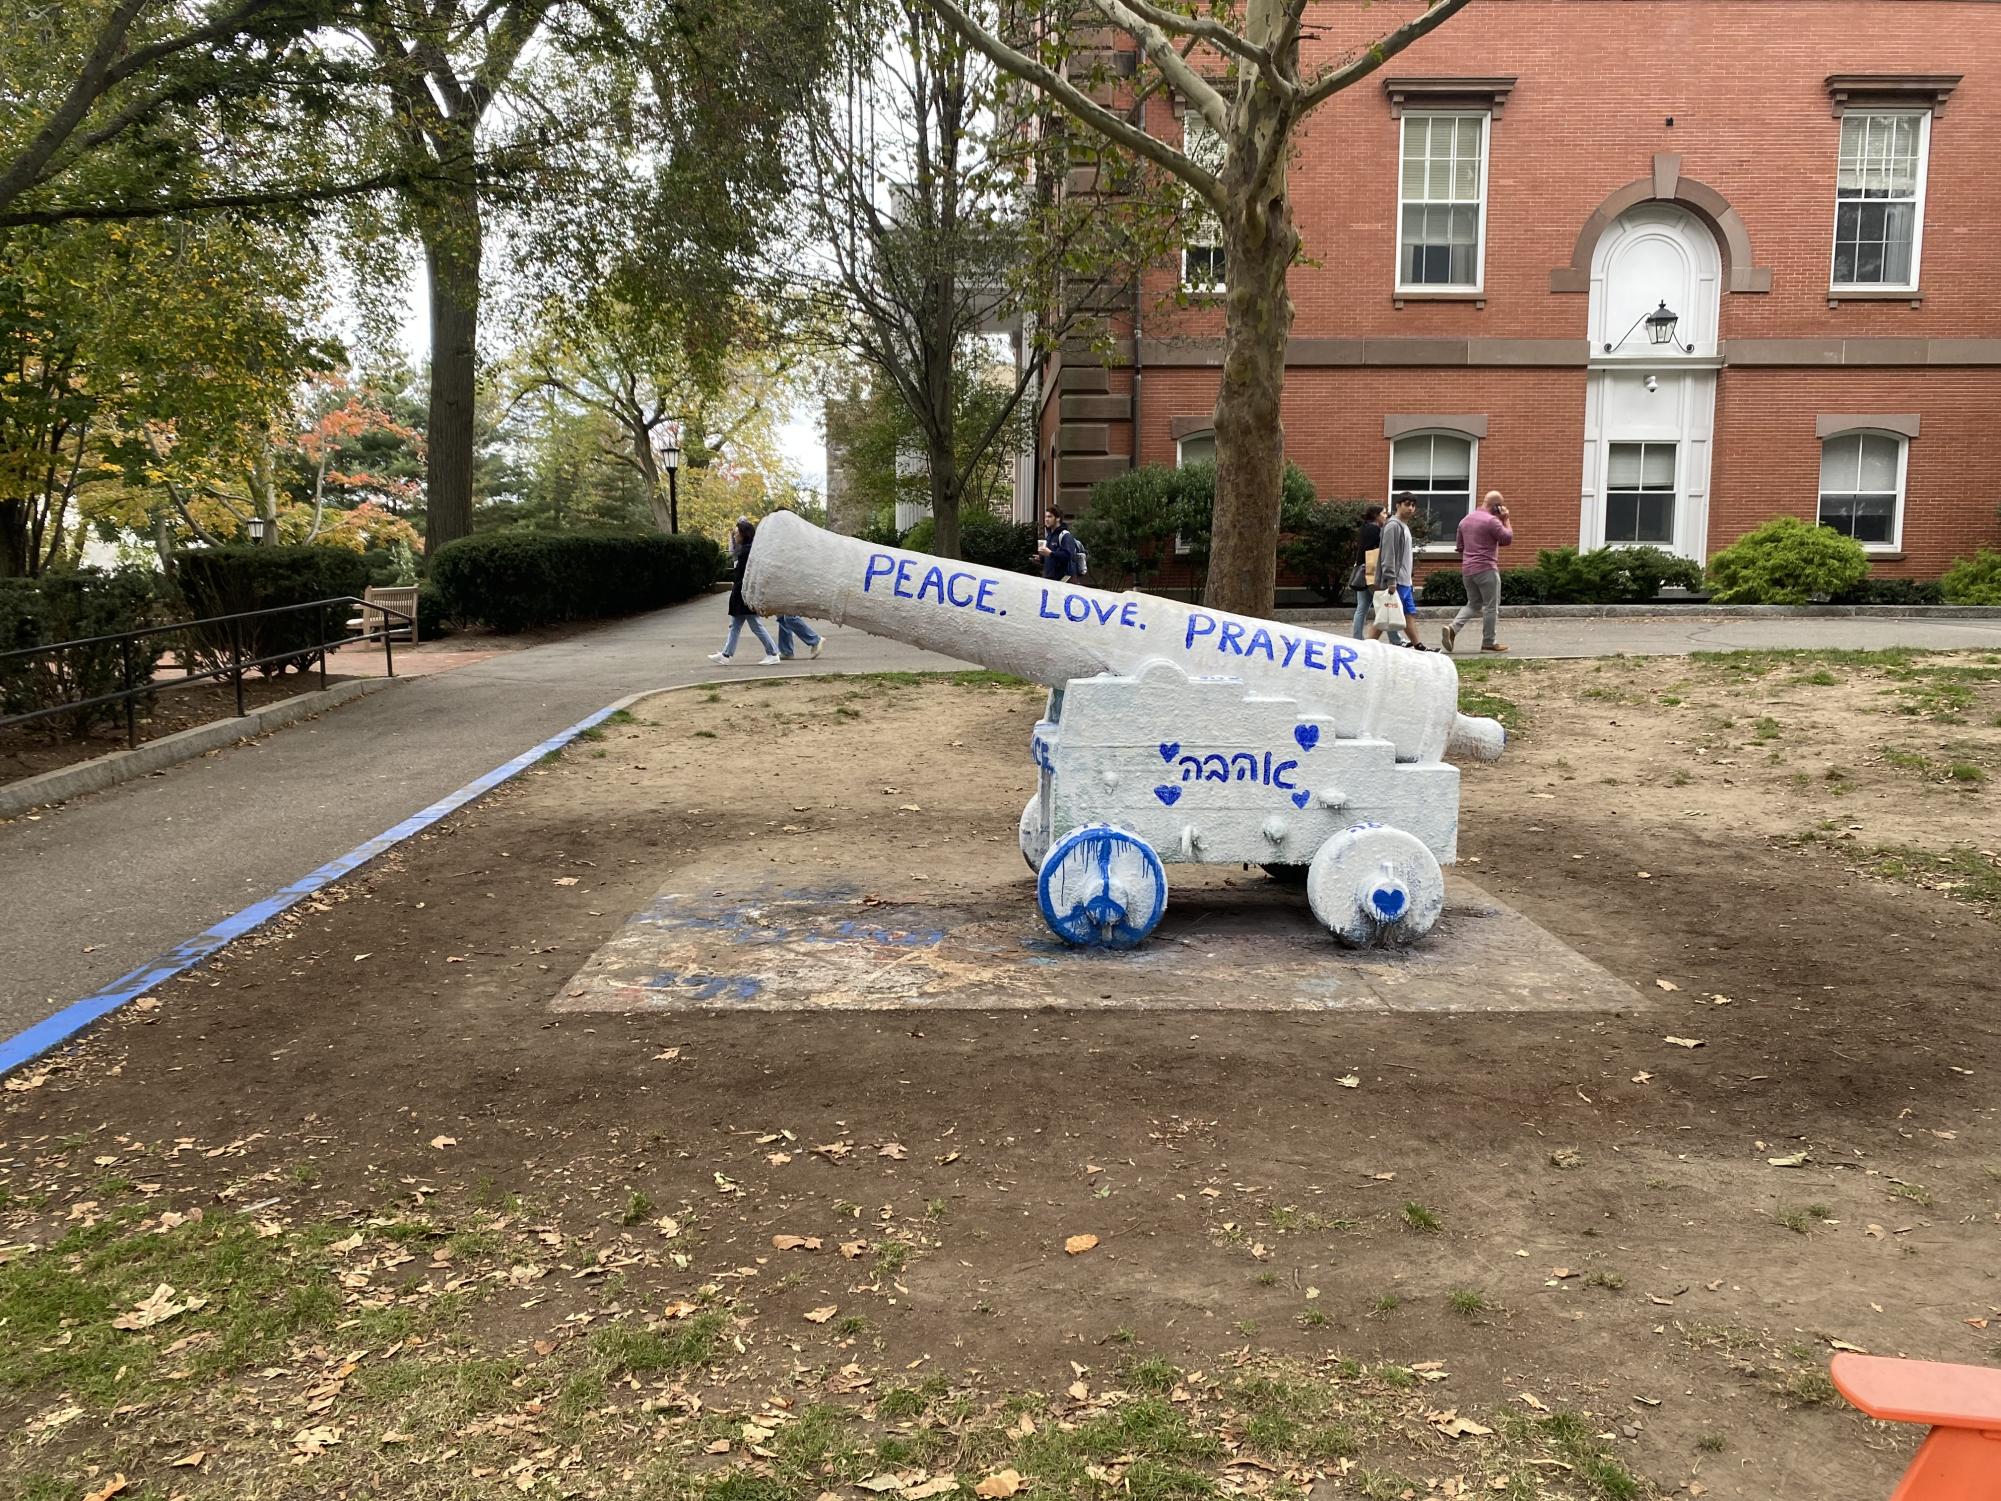 The cannon at Tufts University, painted blue and white to represent Israels colors, promotes messages of peace and love. 